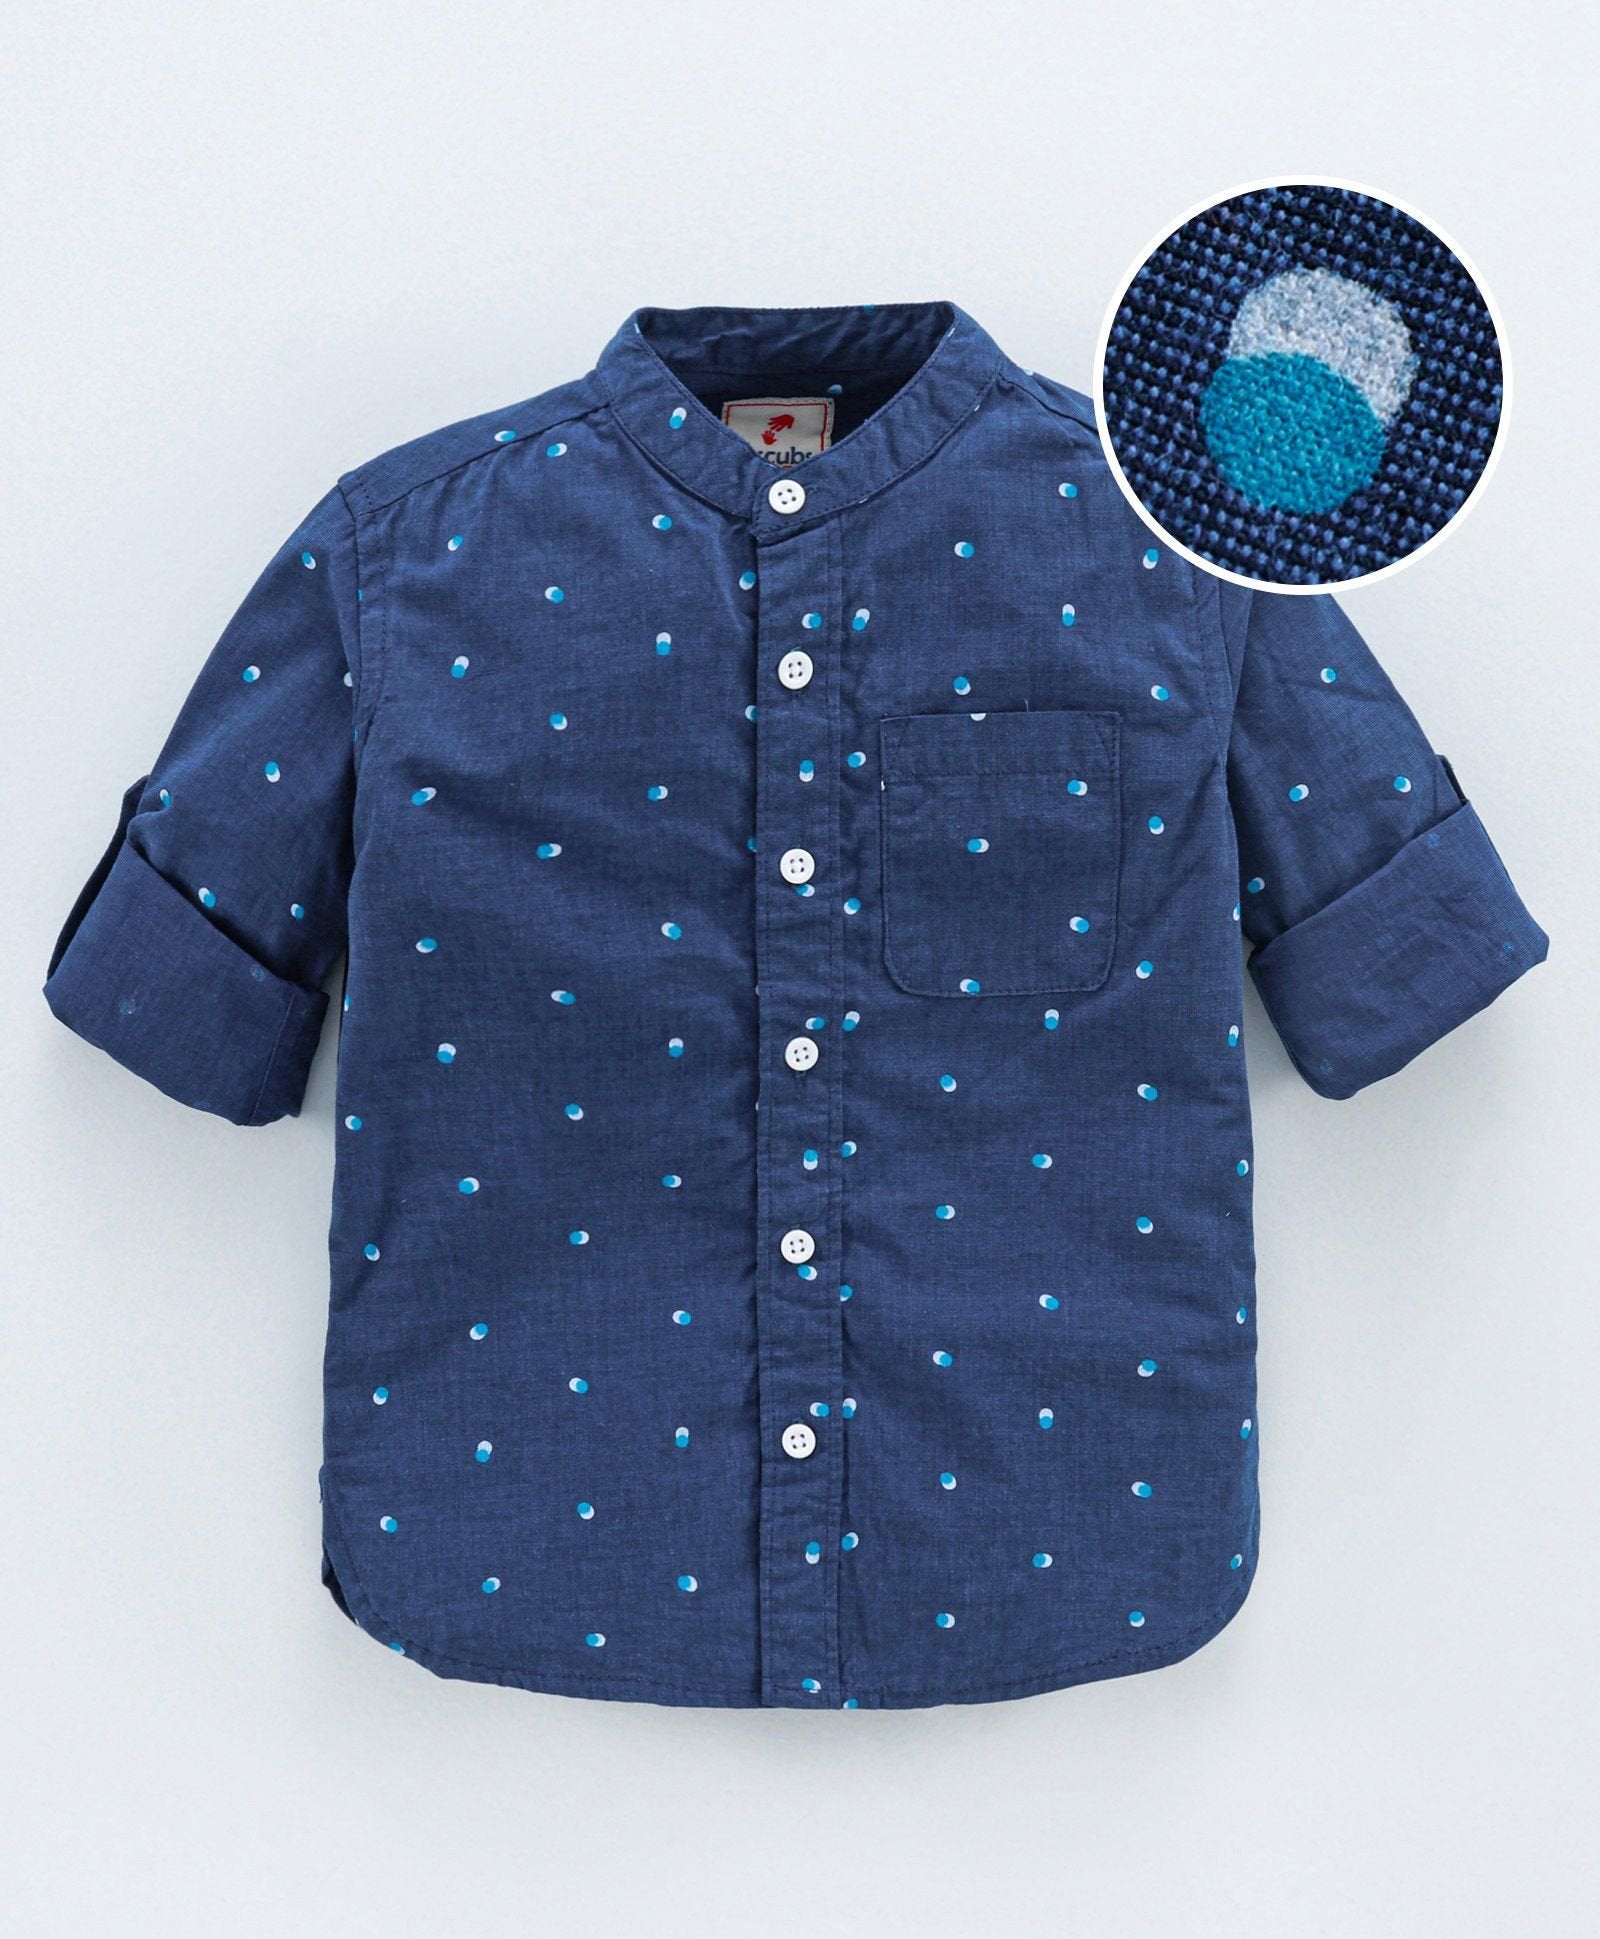 Full Sleeves All Over Printed 100% Cotton Soft Feel Bio-wash Shirt - Navy